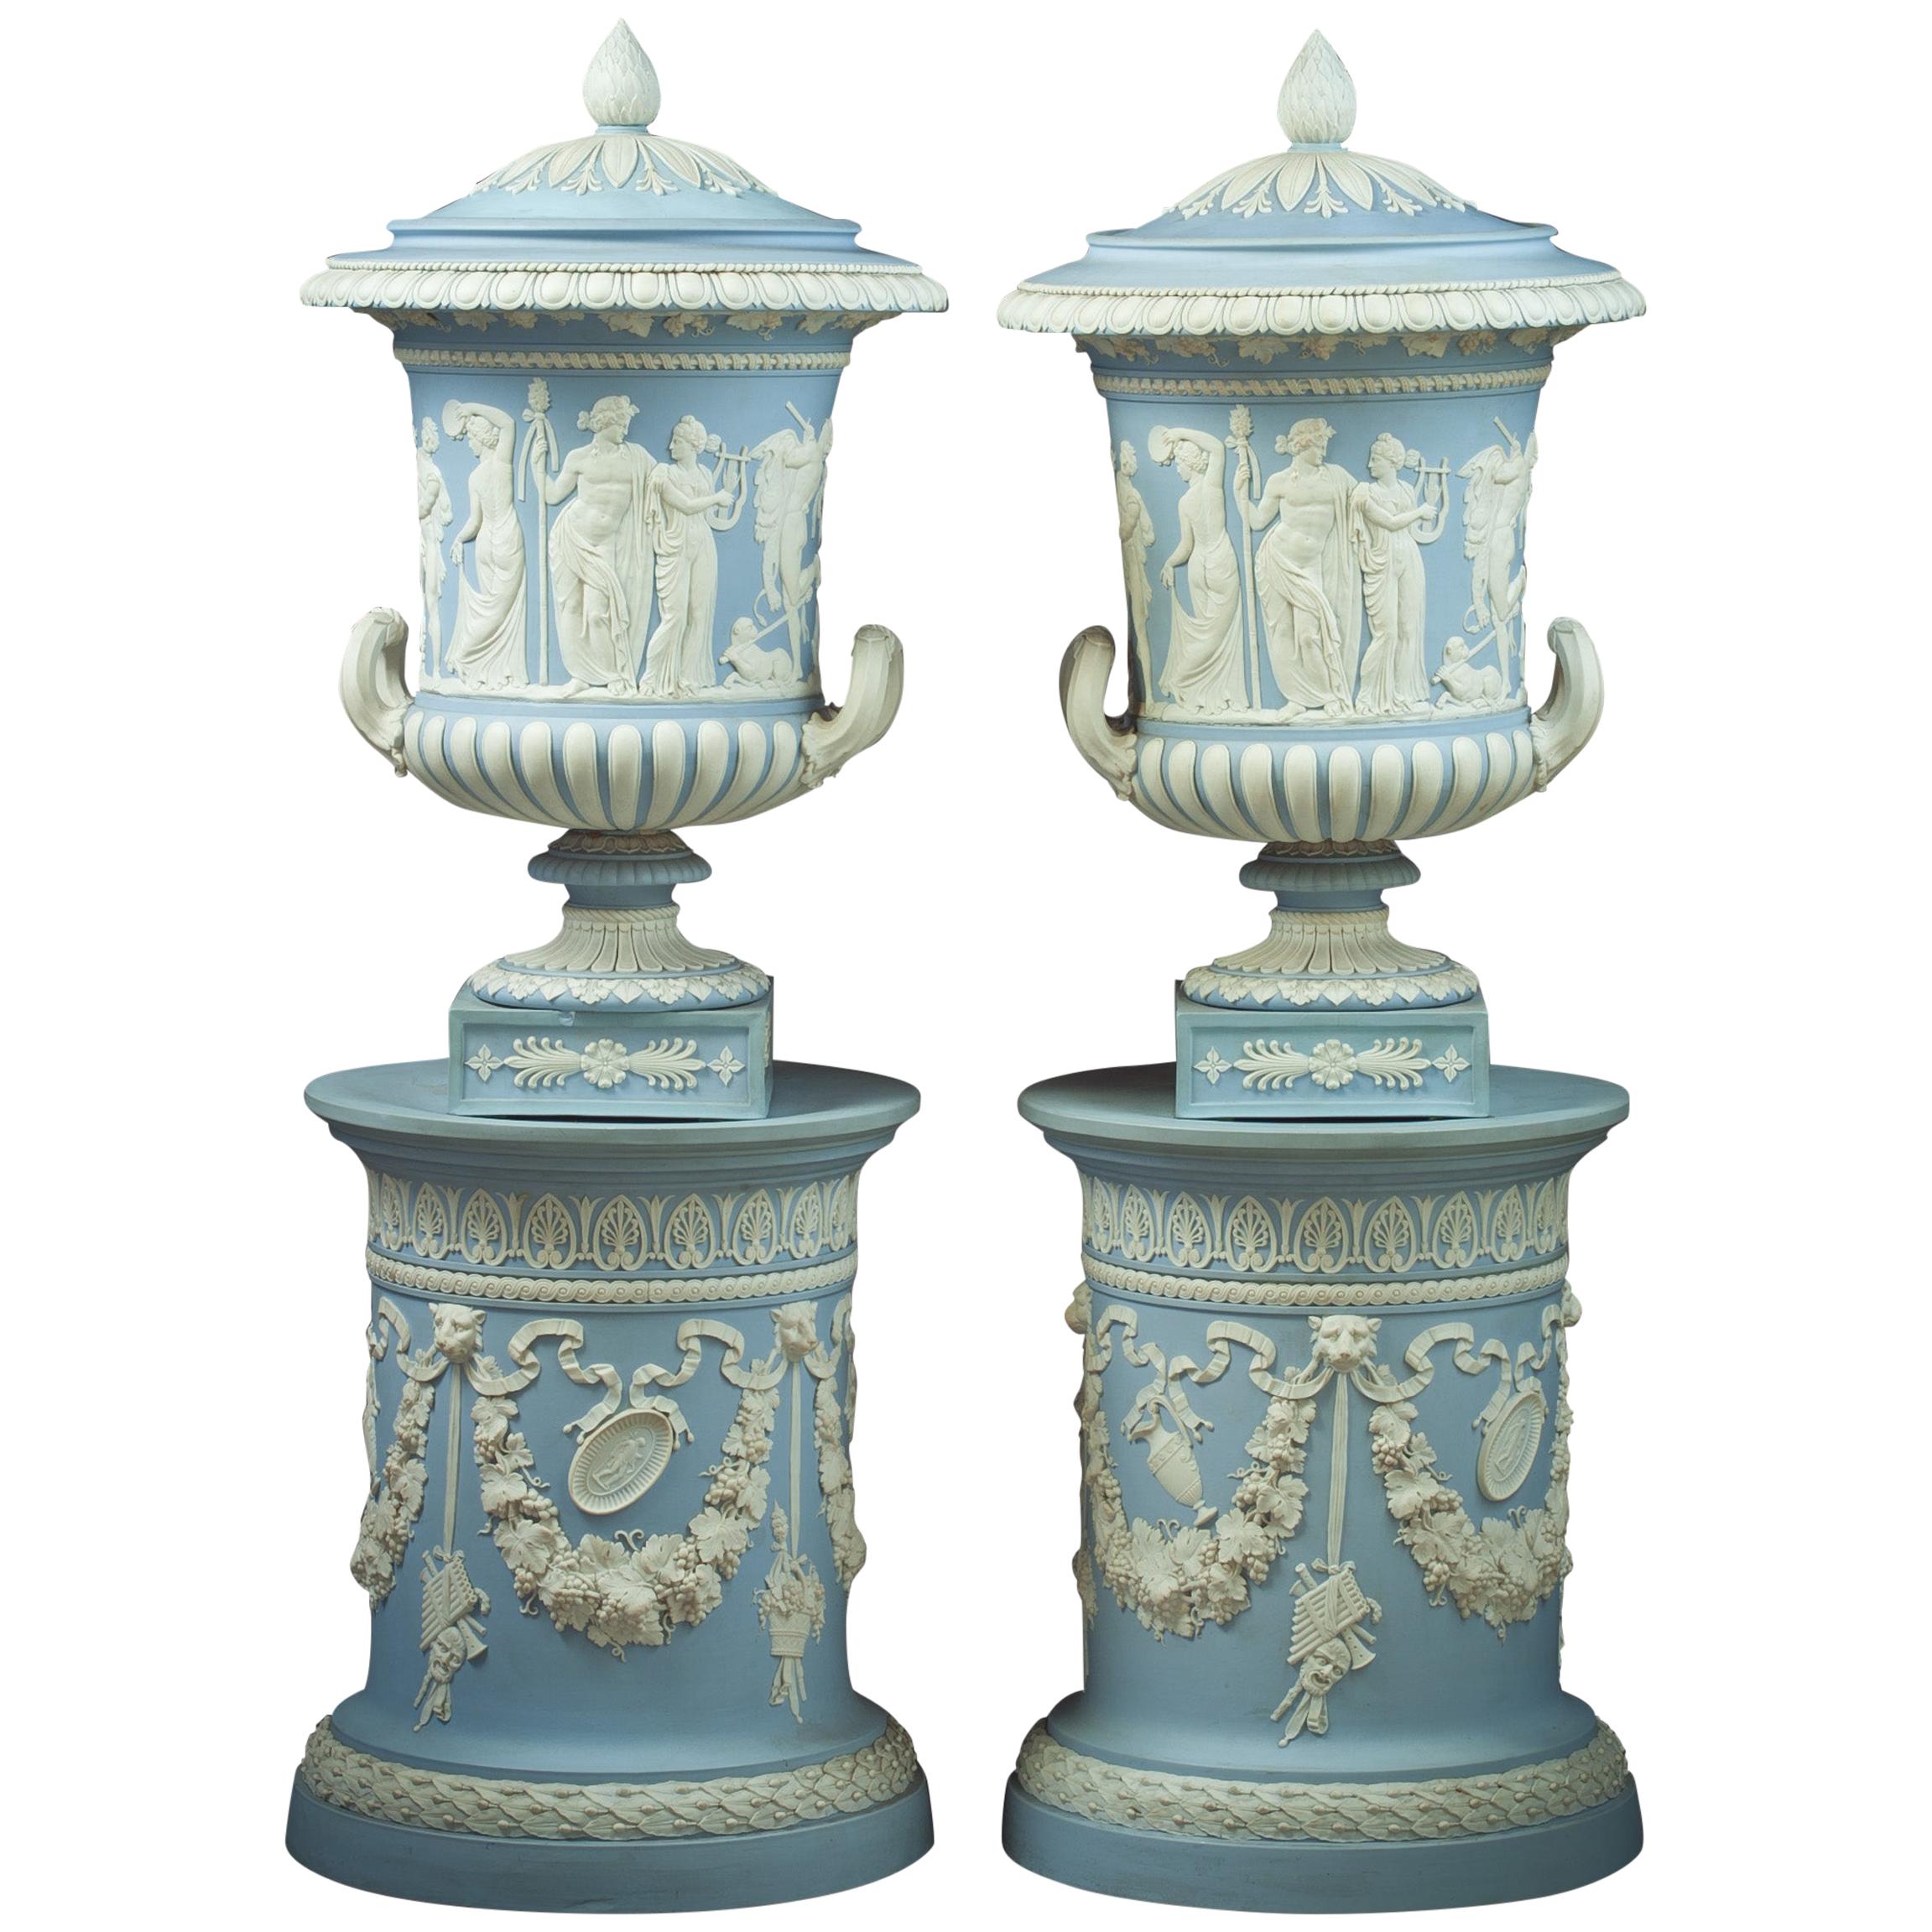 Pair of Wedgwood Borghese Covered Vases, circa 1840 For Sale